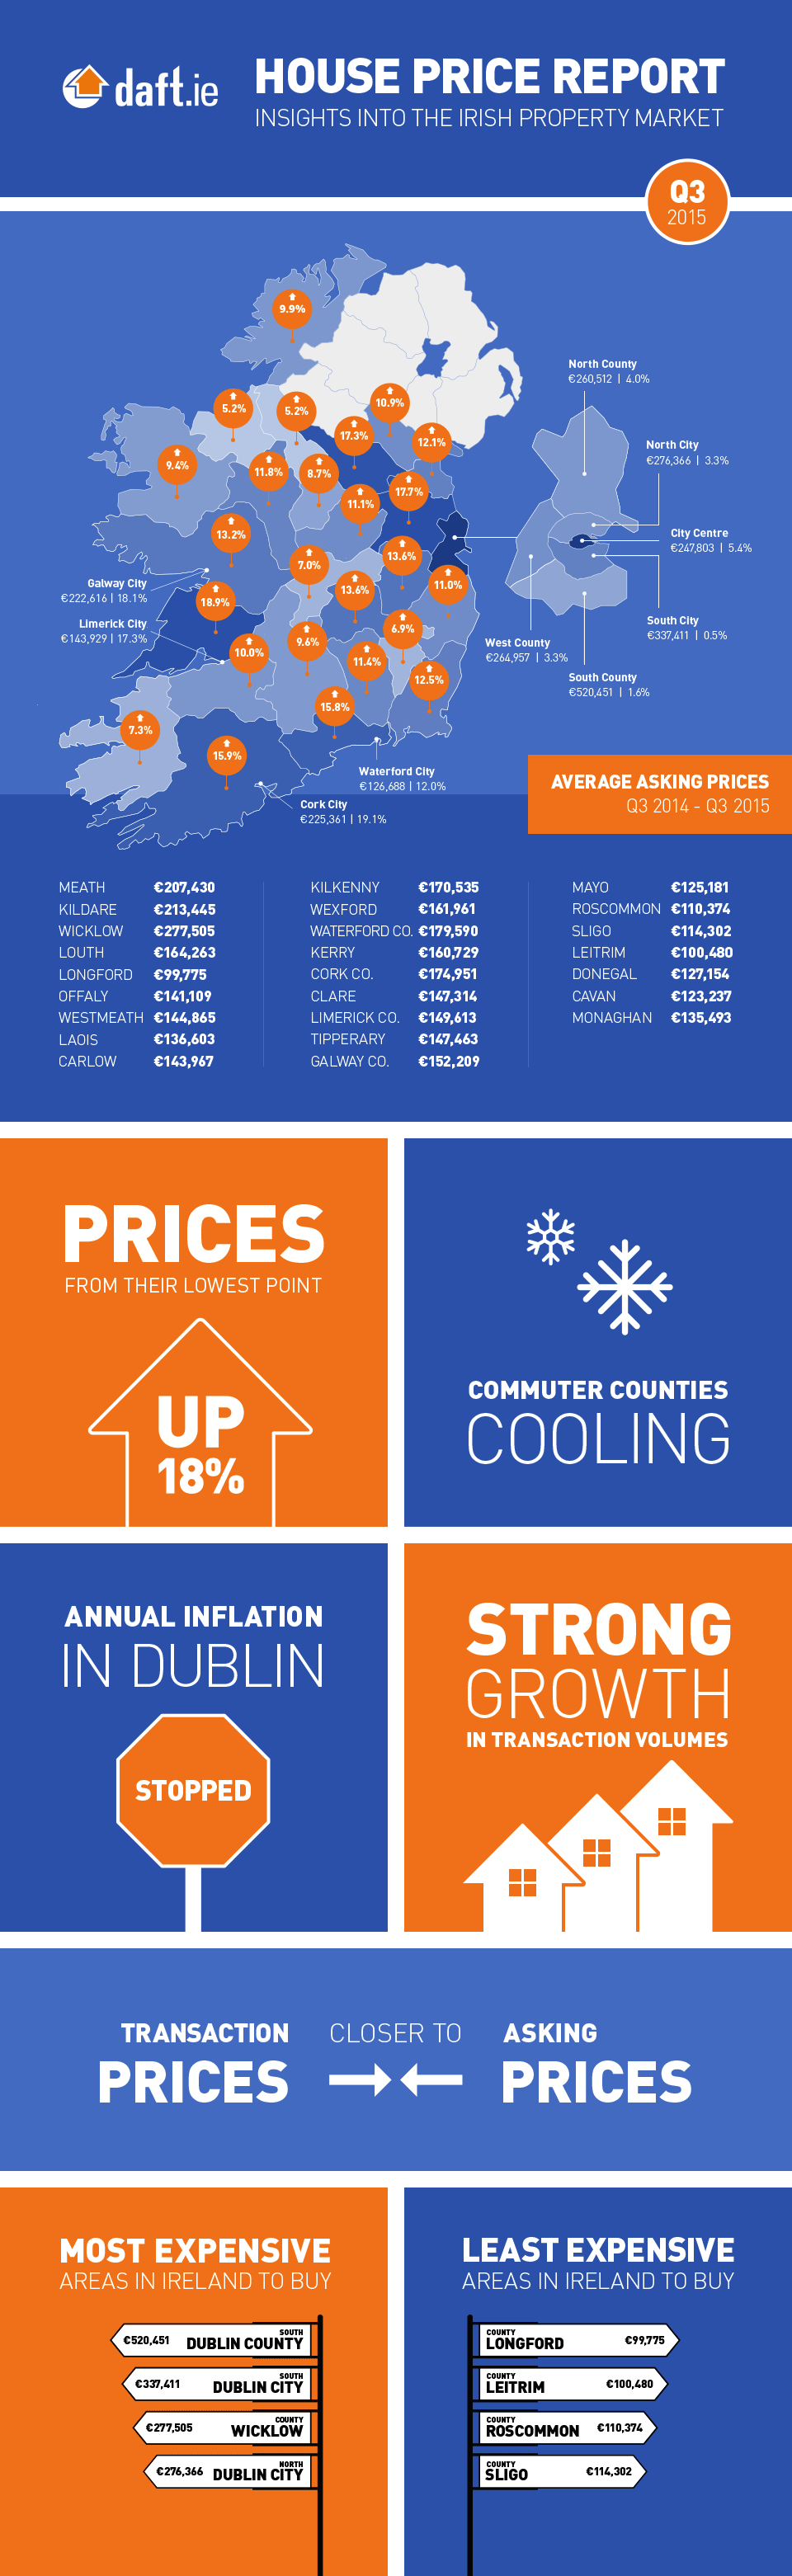 Daft.ie House Price Report: Q3 2015 Infographic